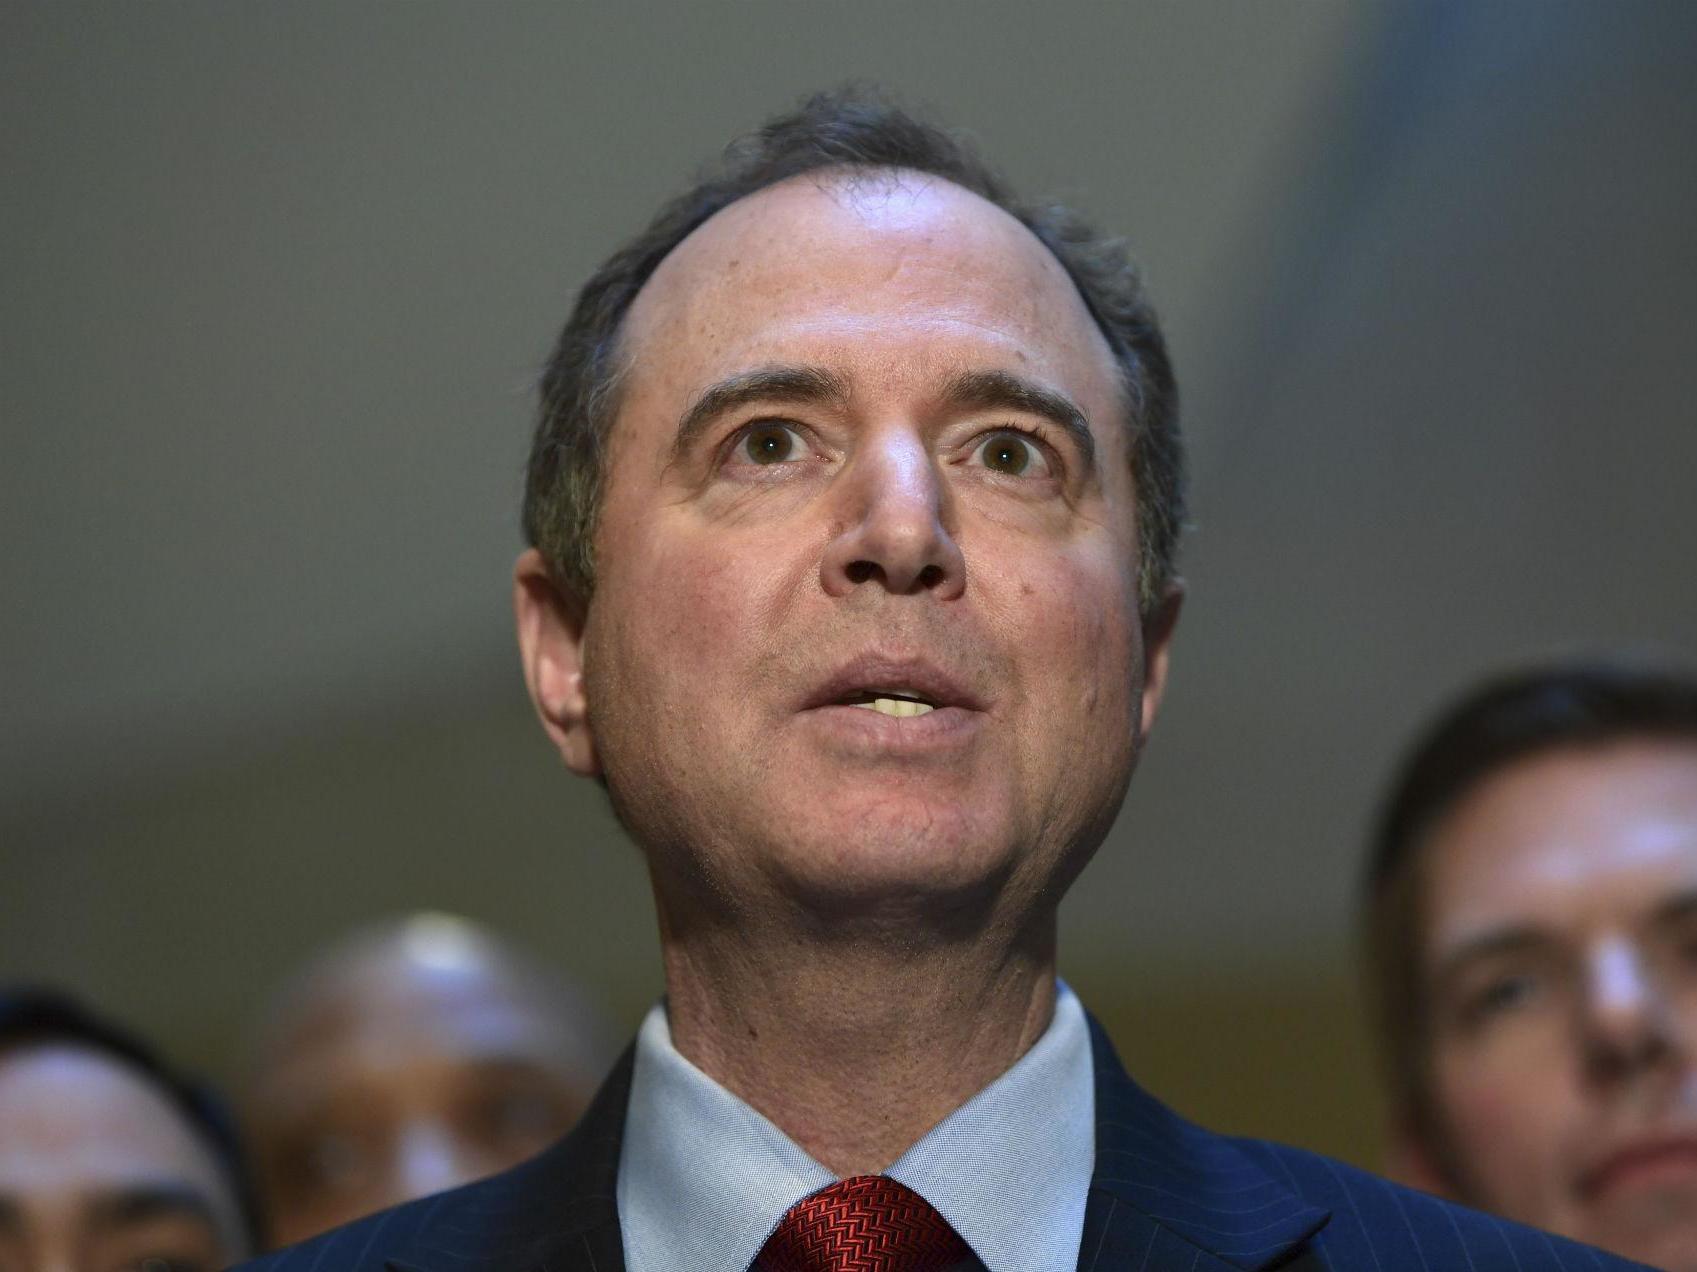 Adam Schiff has led calls for further investigation into possible Russian interference in the 2016 election